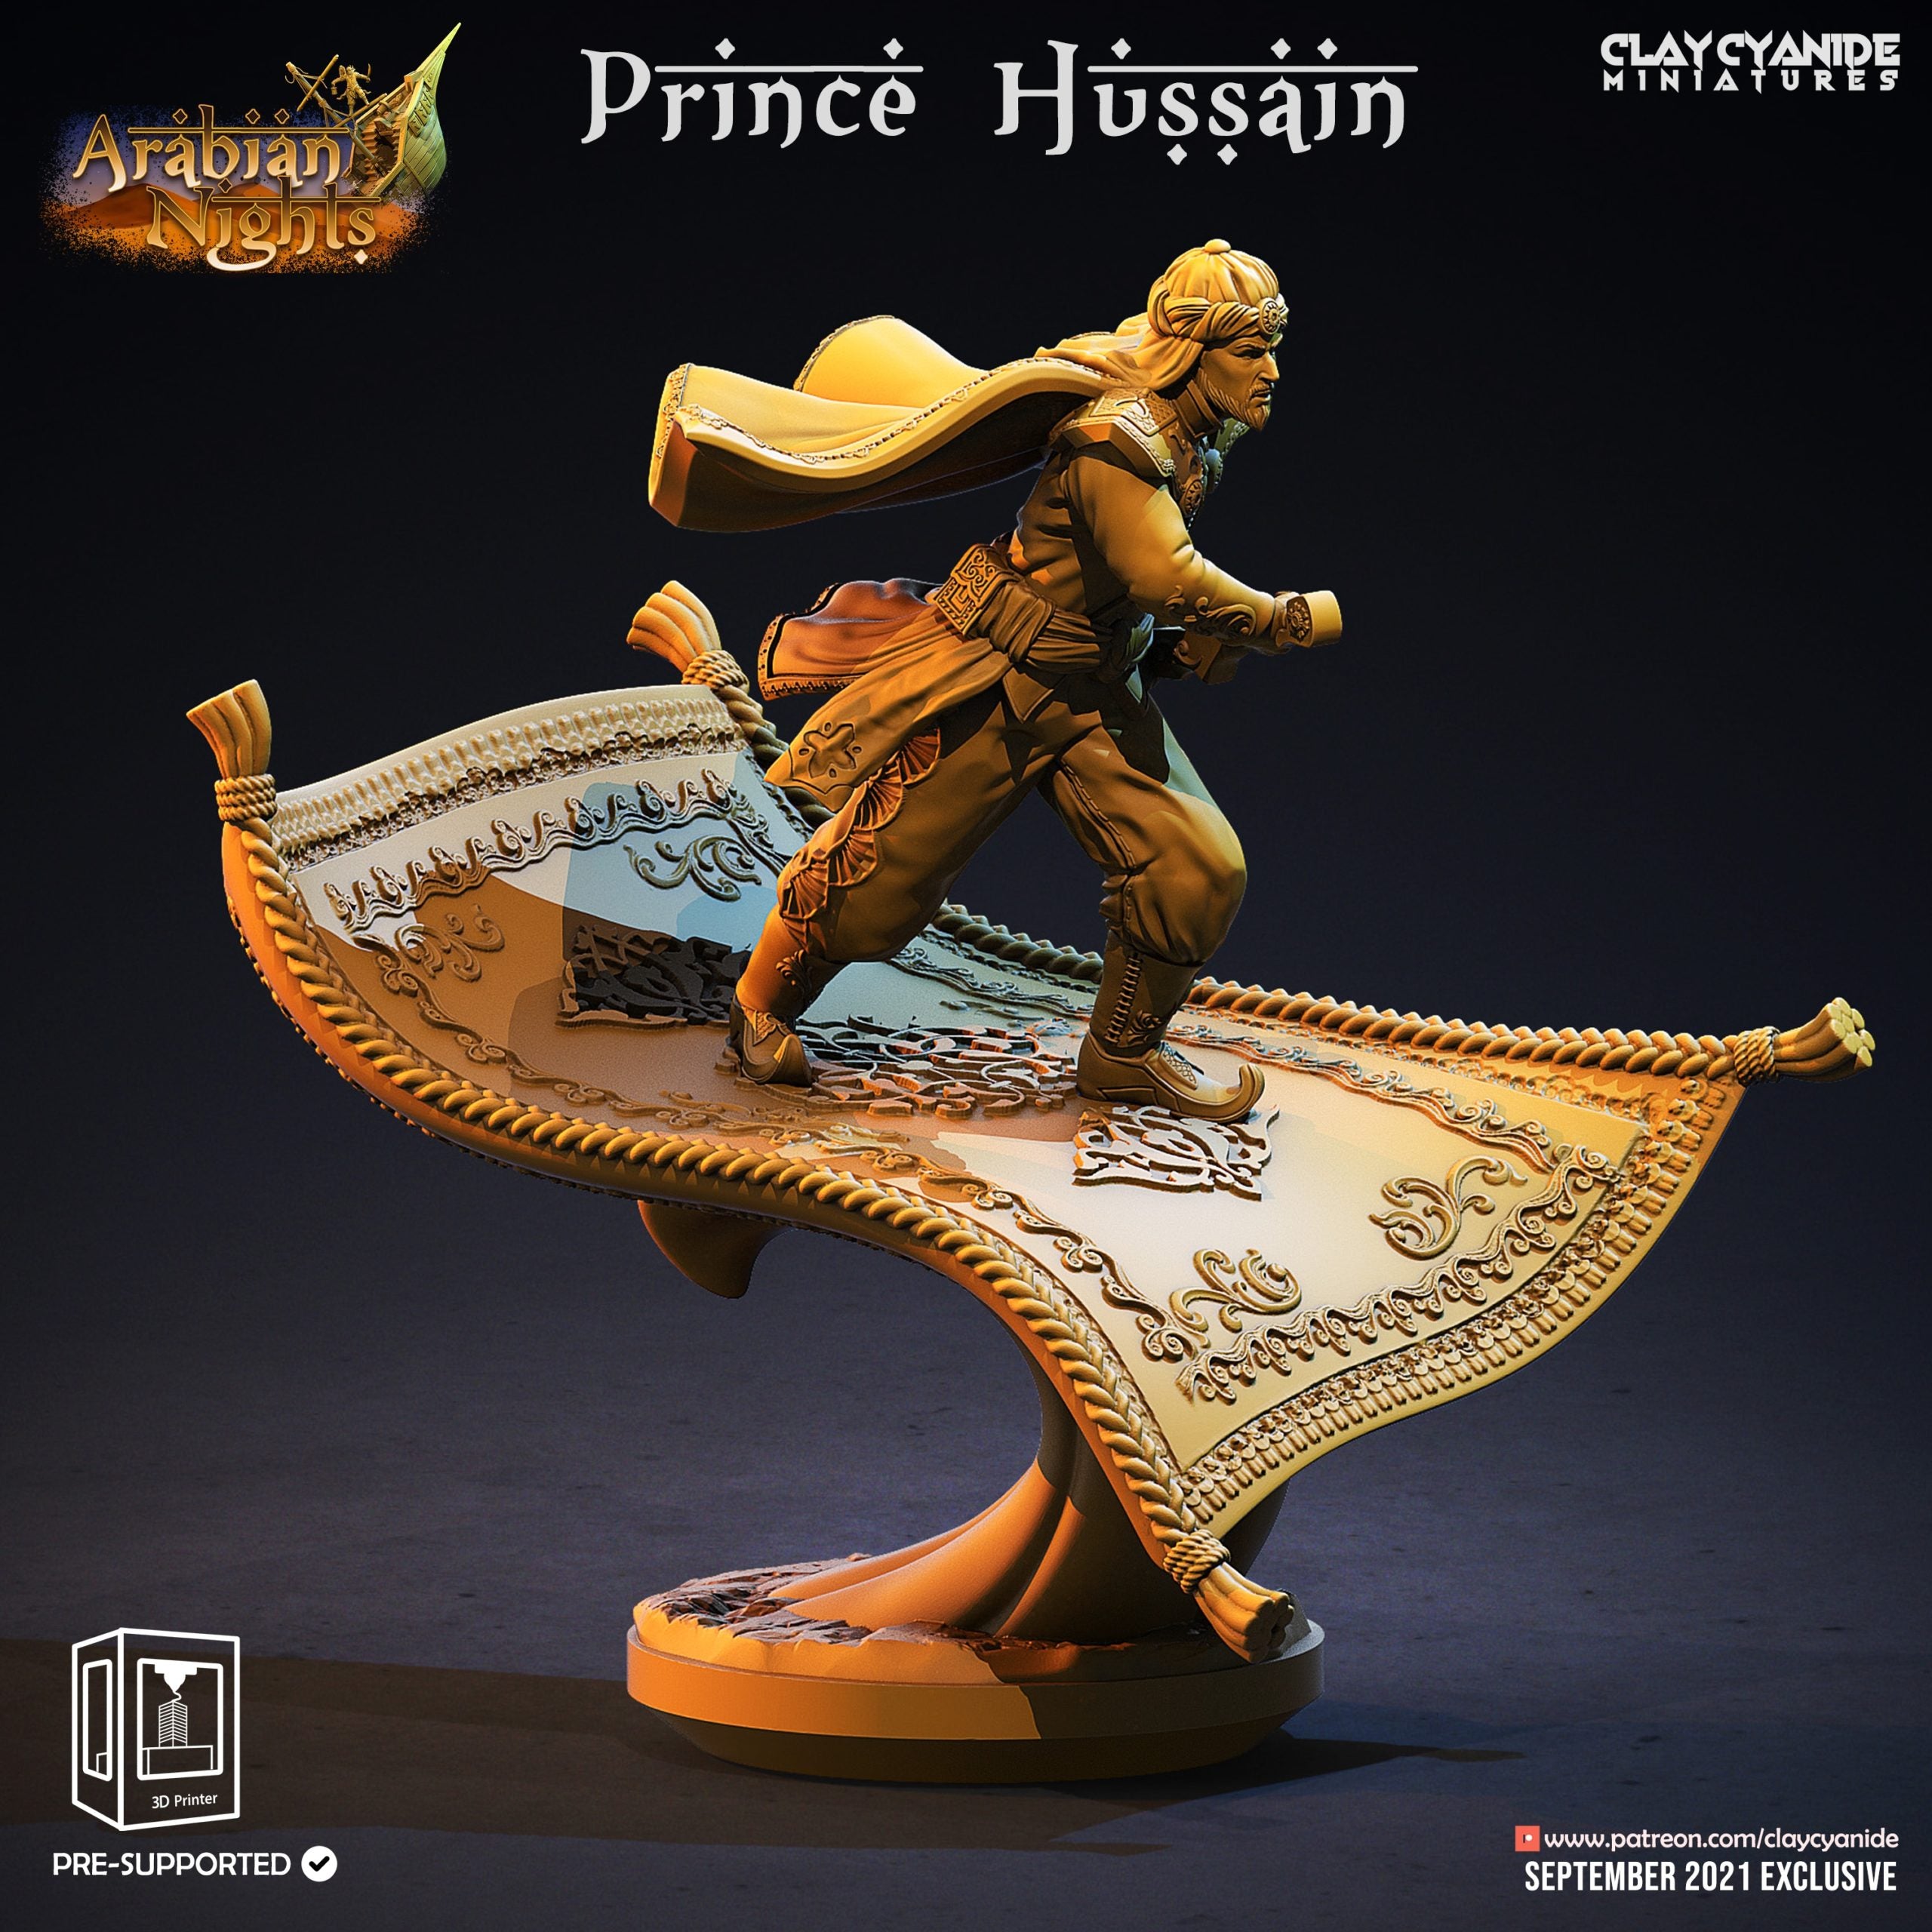 Prince of the Indies - Prince Hussain